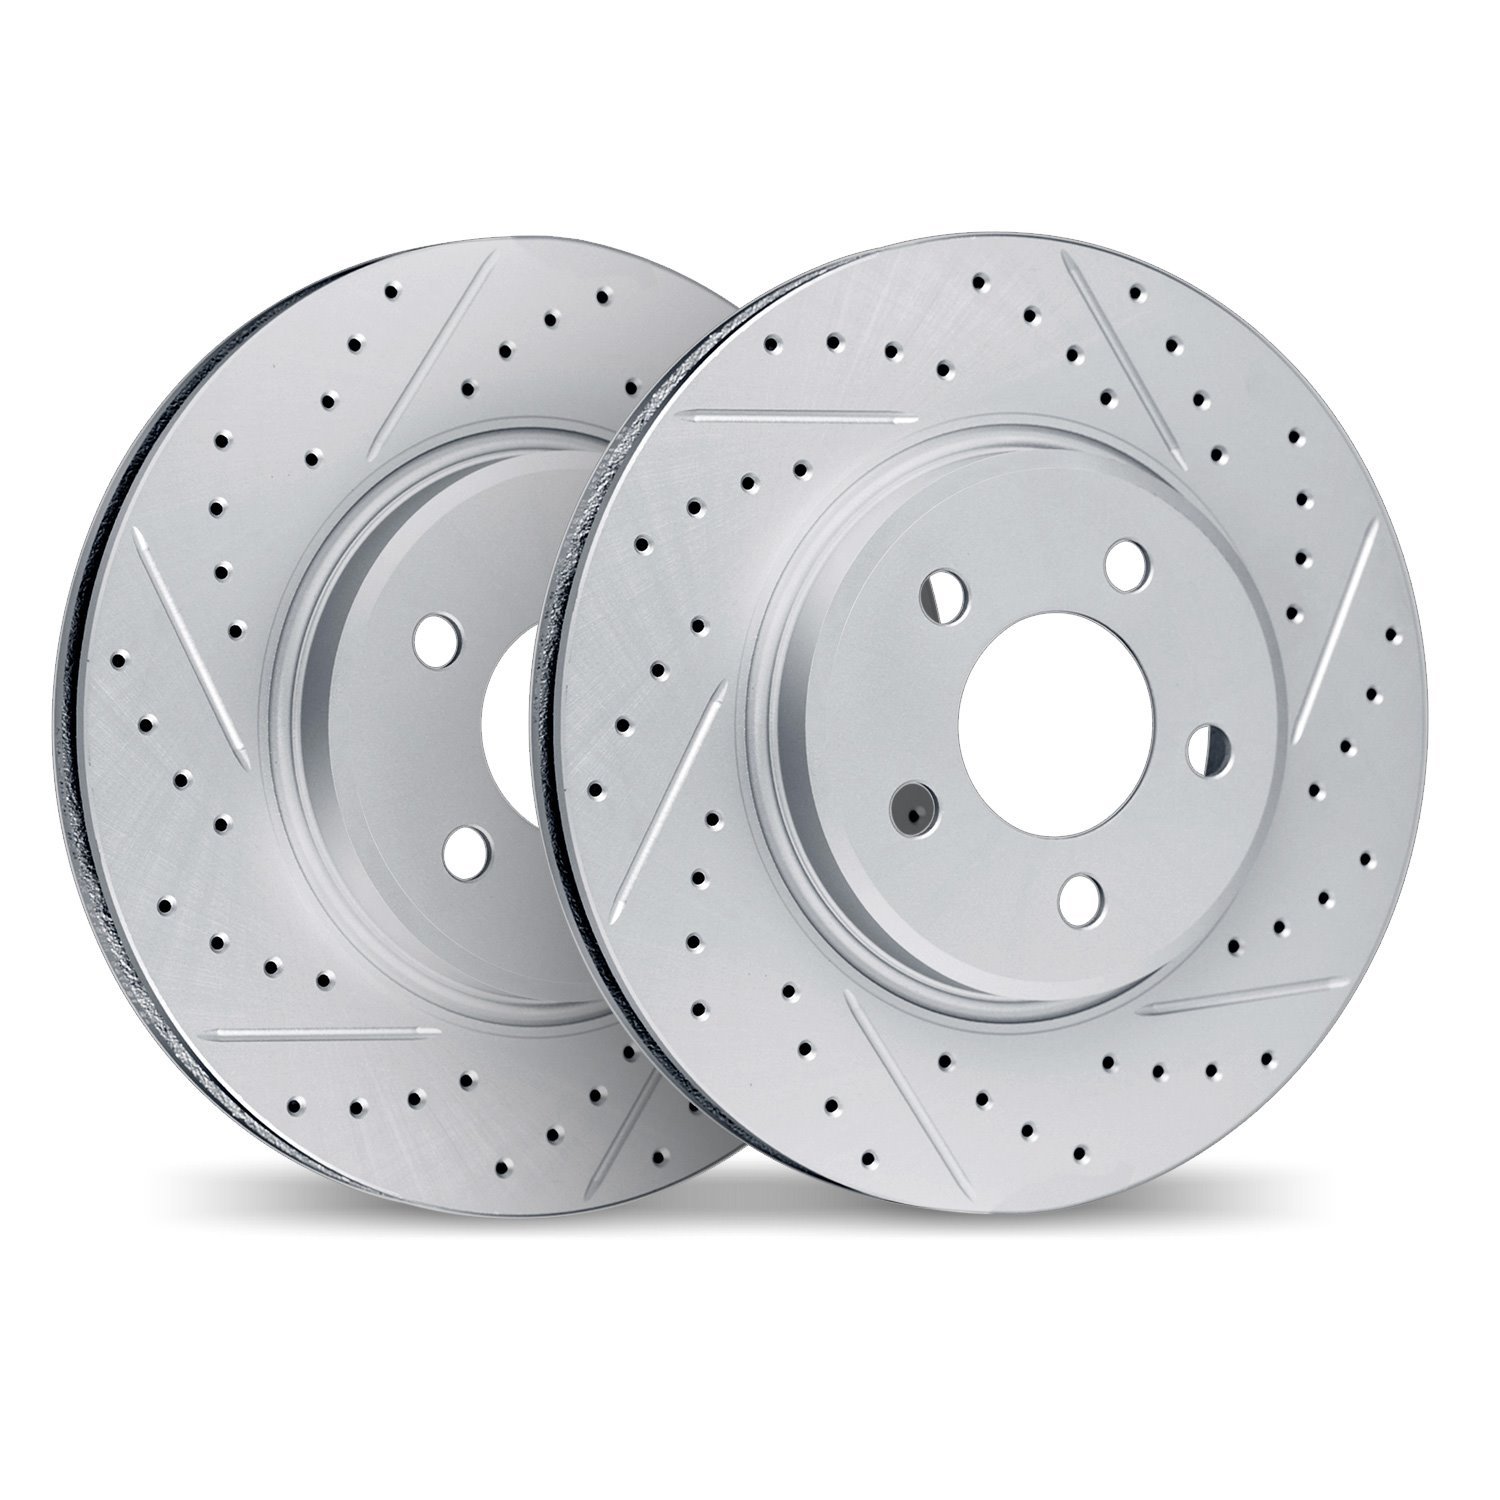 2002-27034 Geoperformance Drilled/Slotted Brake Rotors, 2010-2017 Volvo, Position: Rear